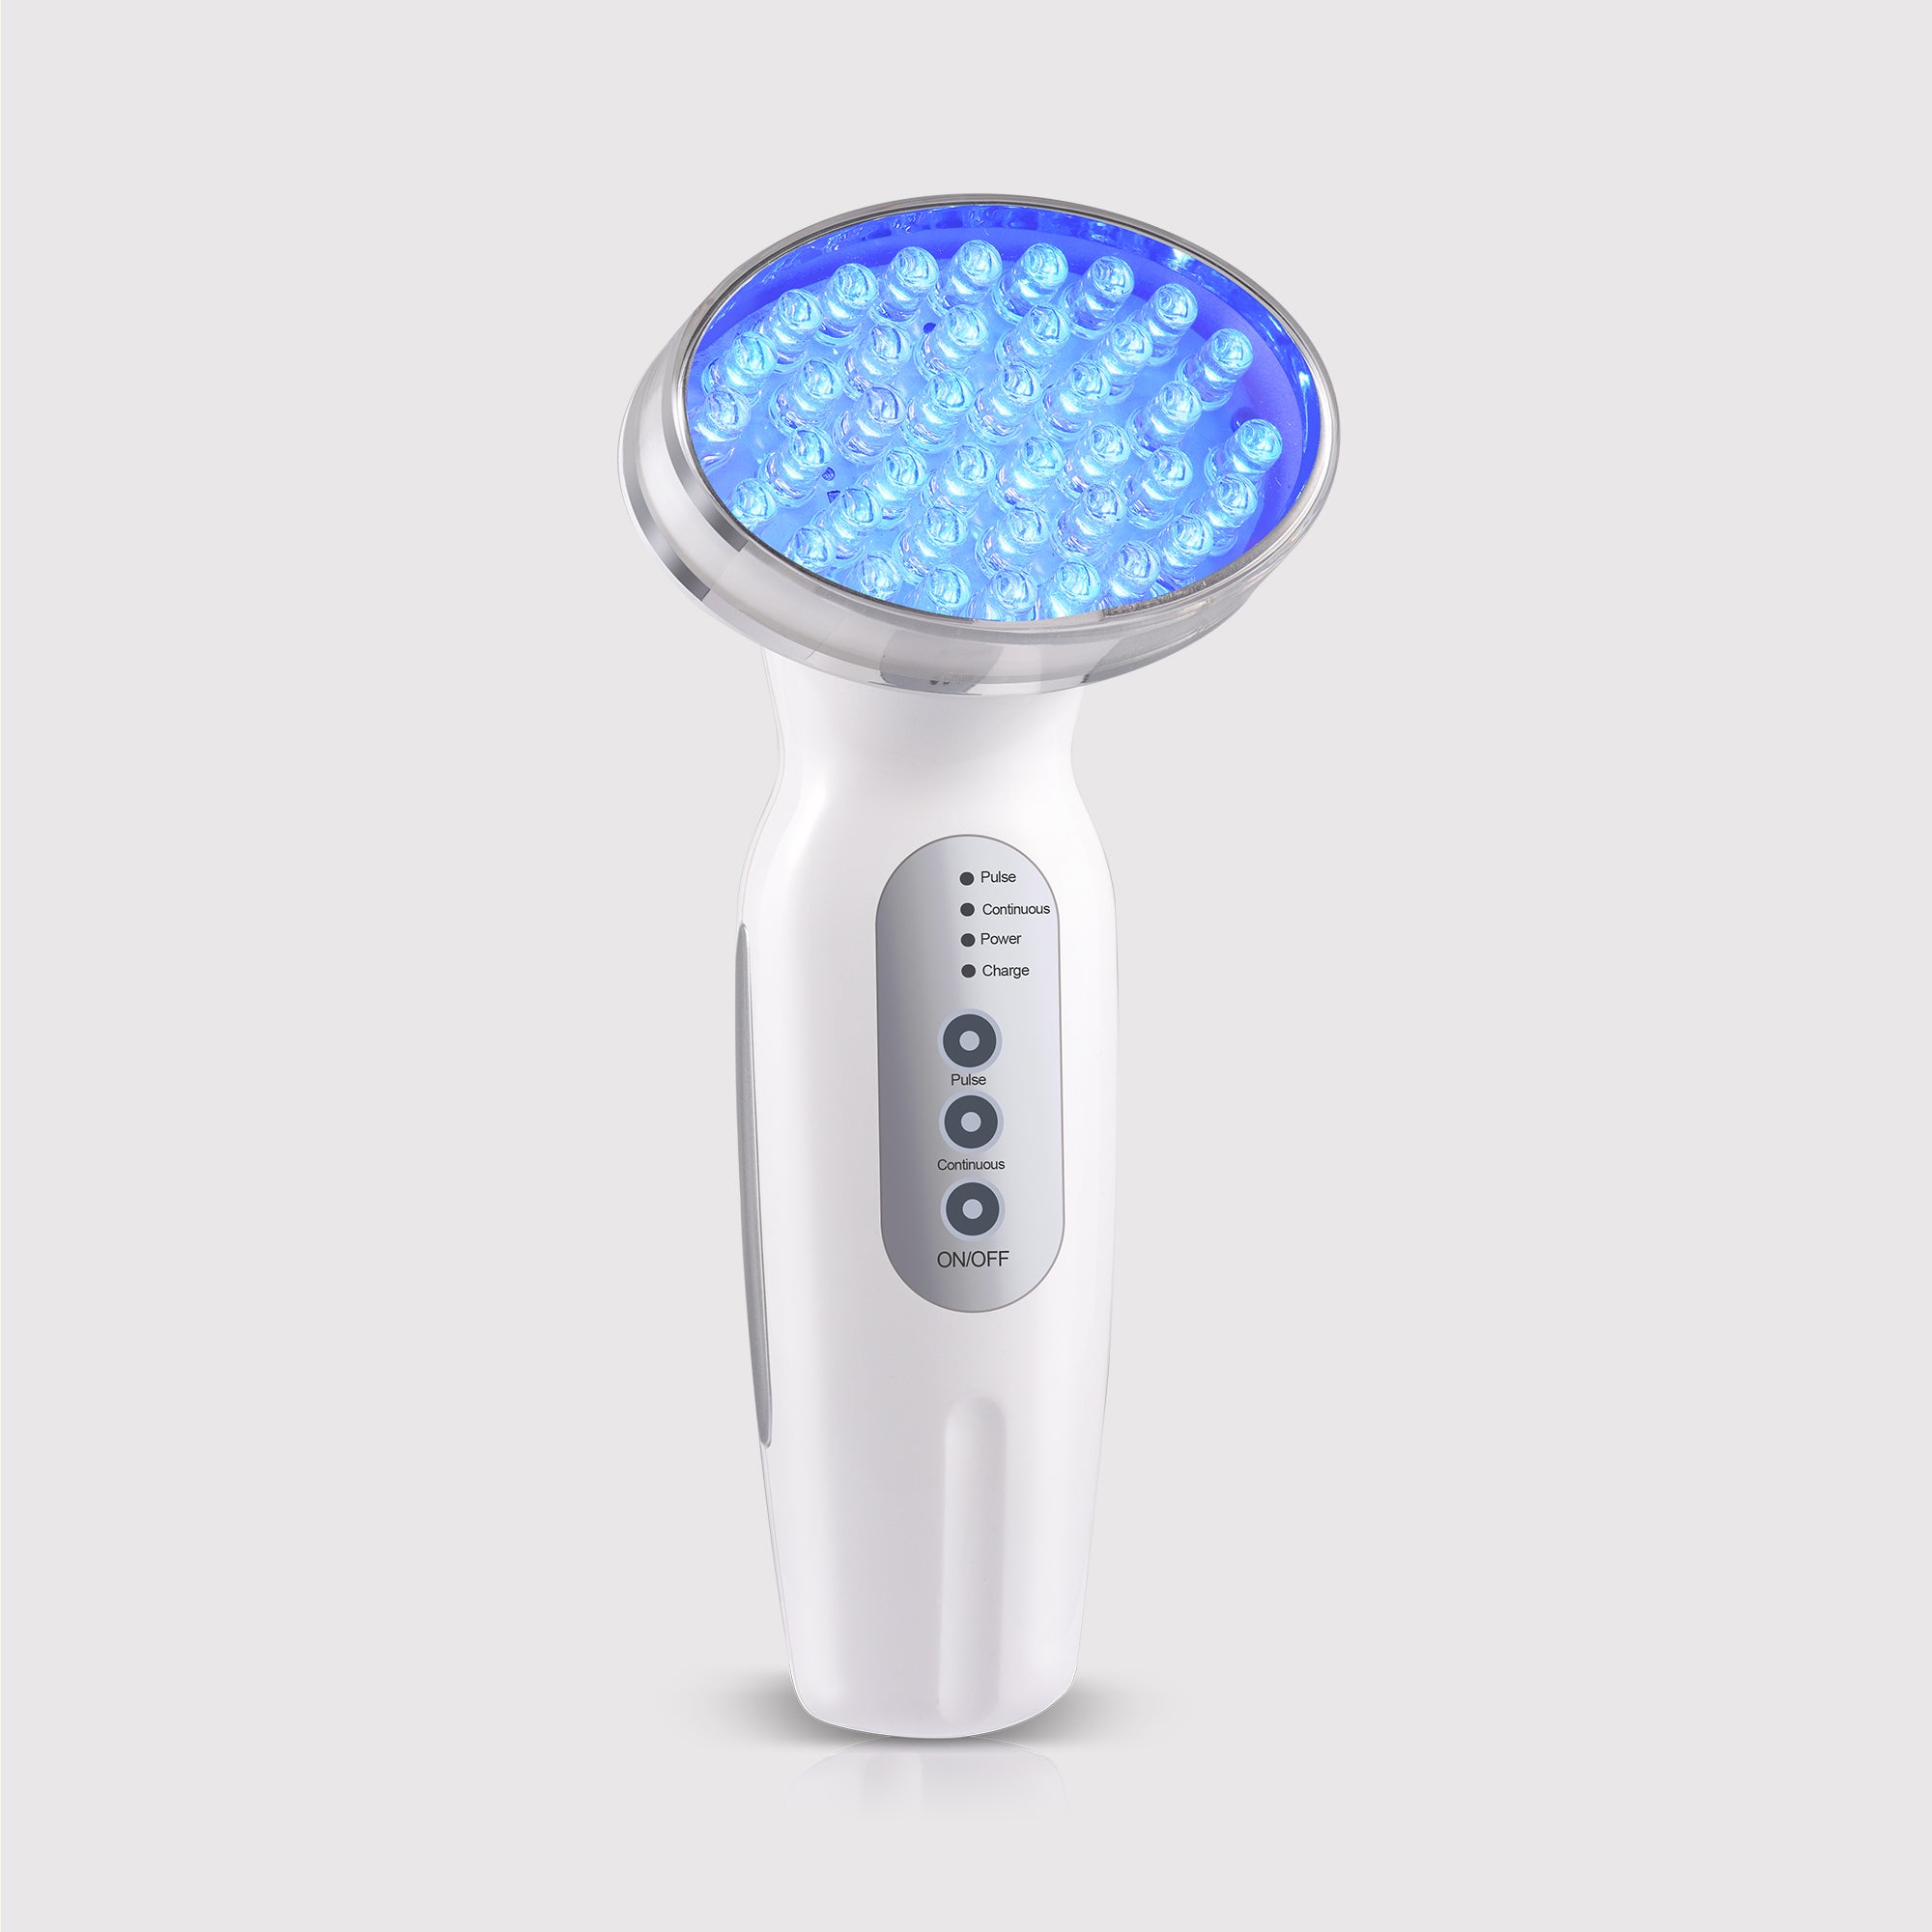 Blue LED+ | Acne Light Therapy - Project E Beauty